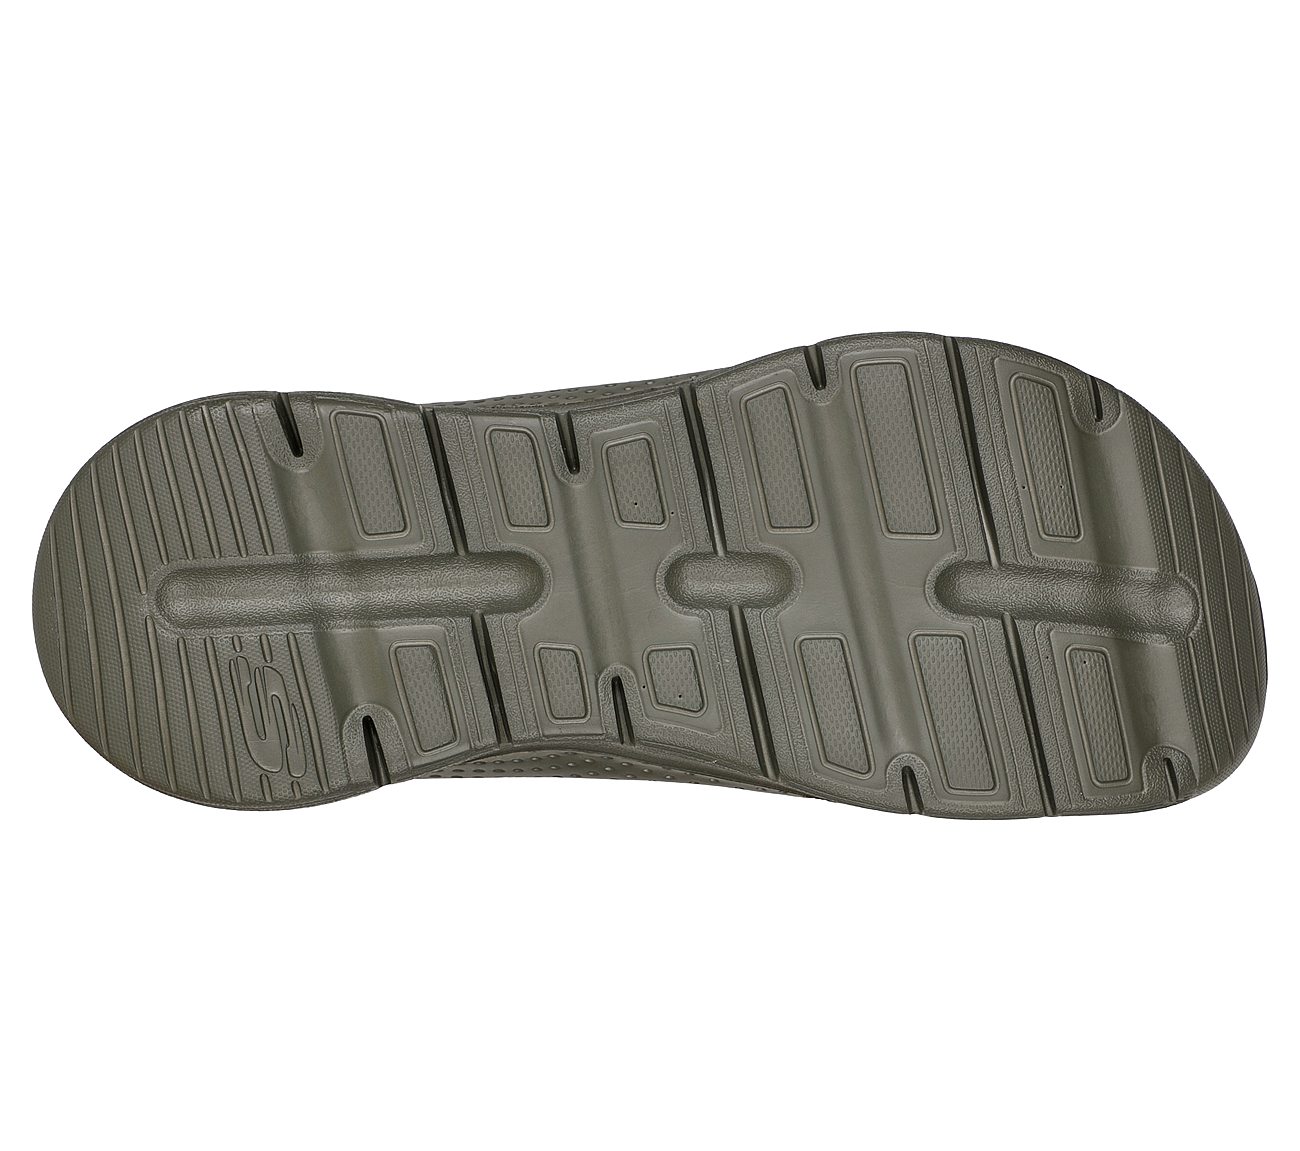 ARCH FIT, OOLIVE Footwear Bottom View